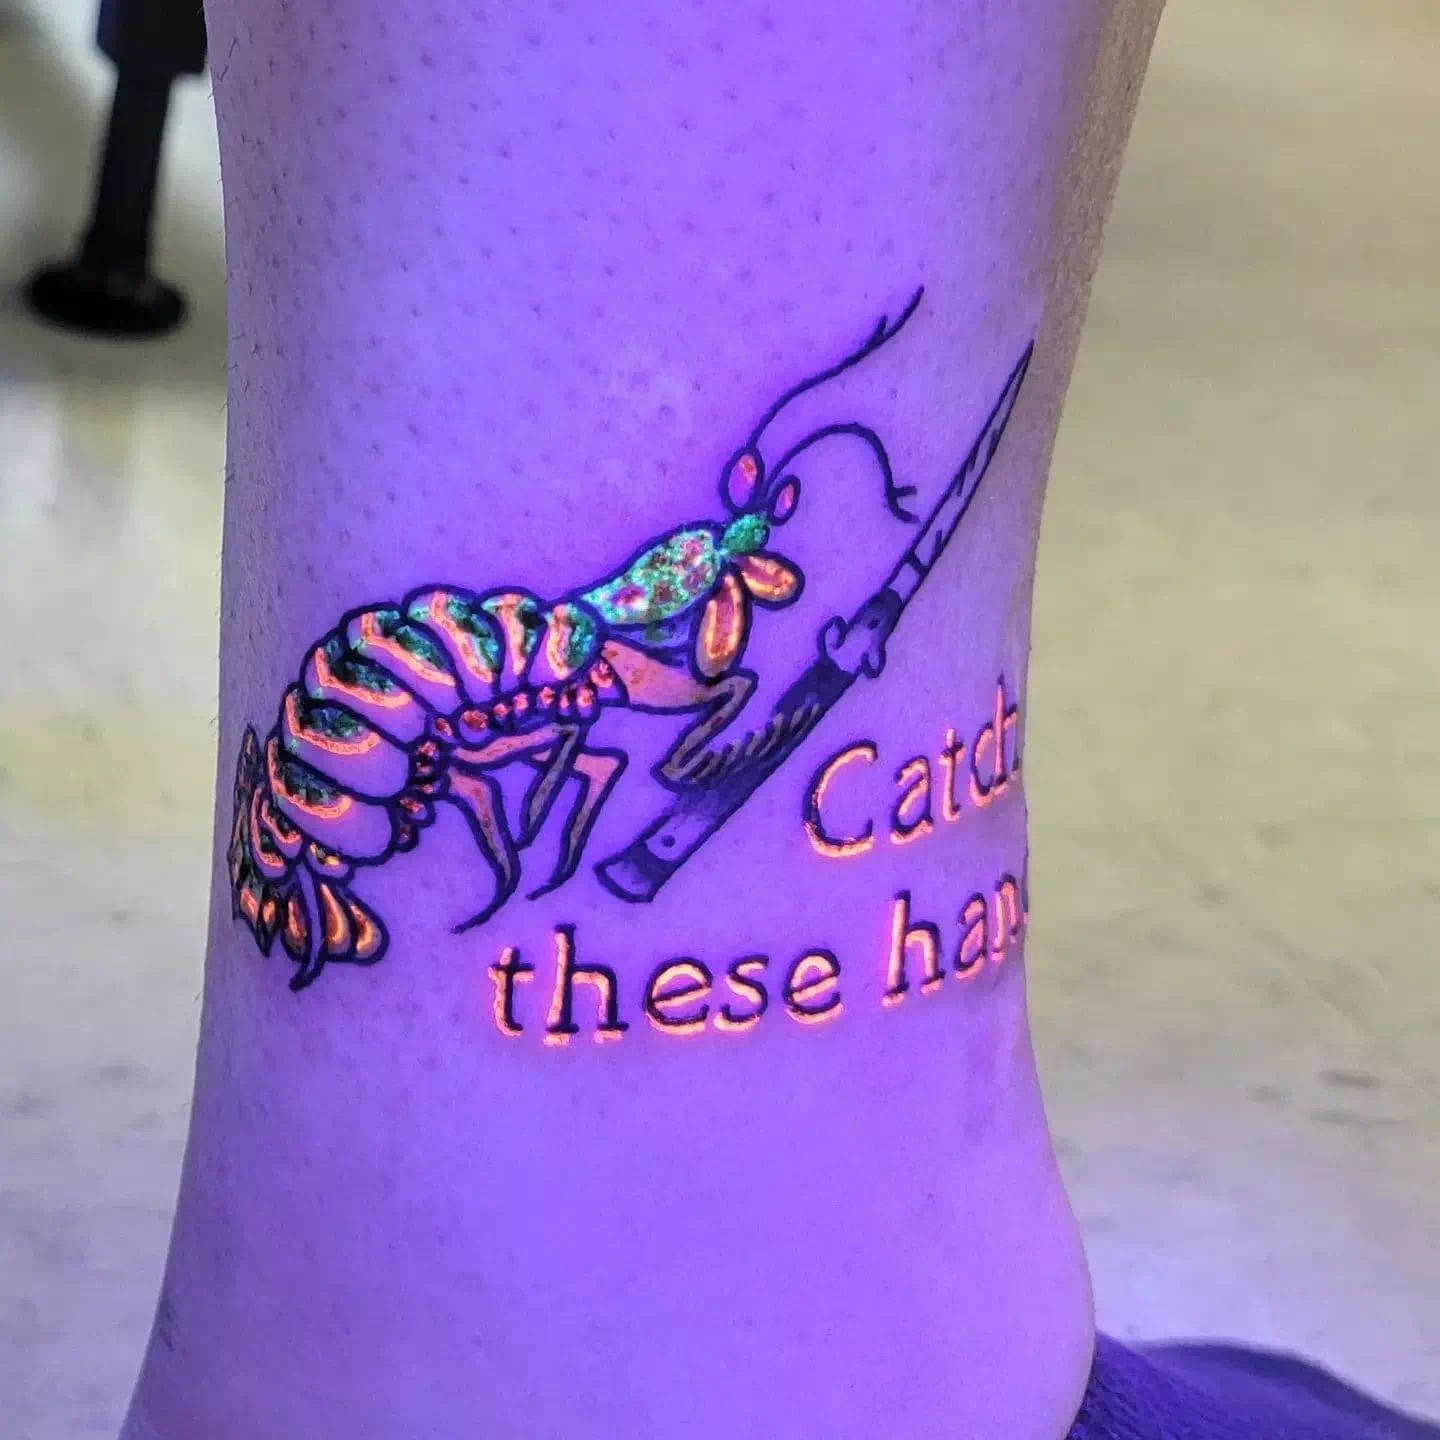 Safety of the blacklight tattoos 2